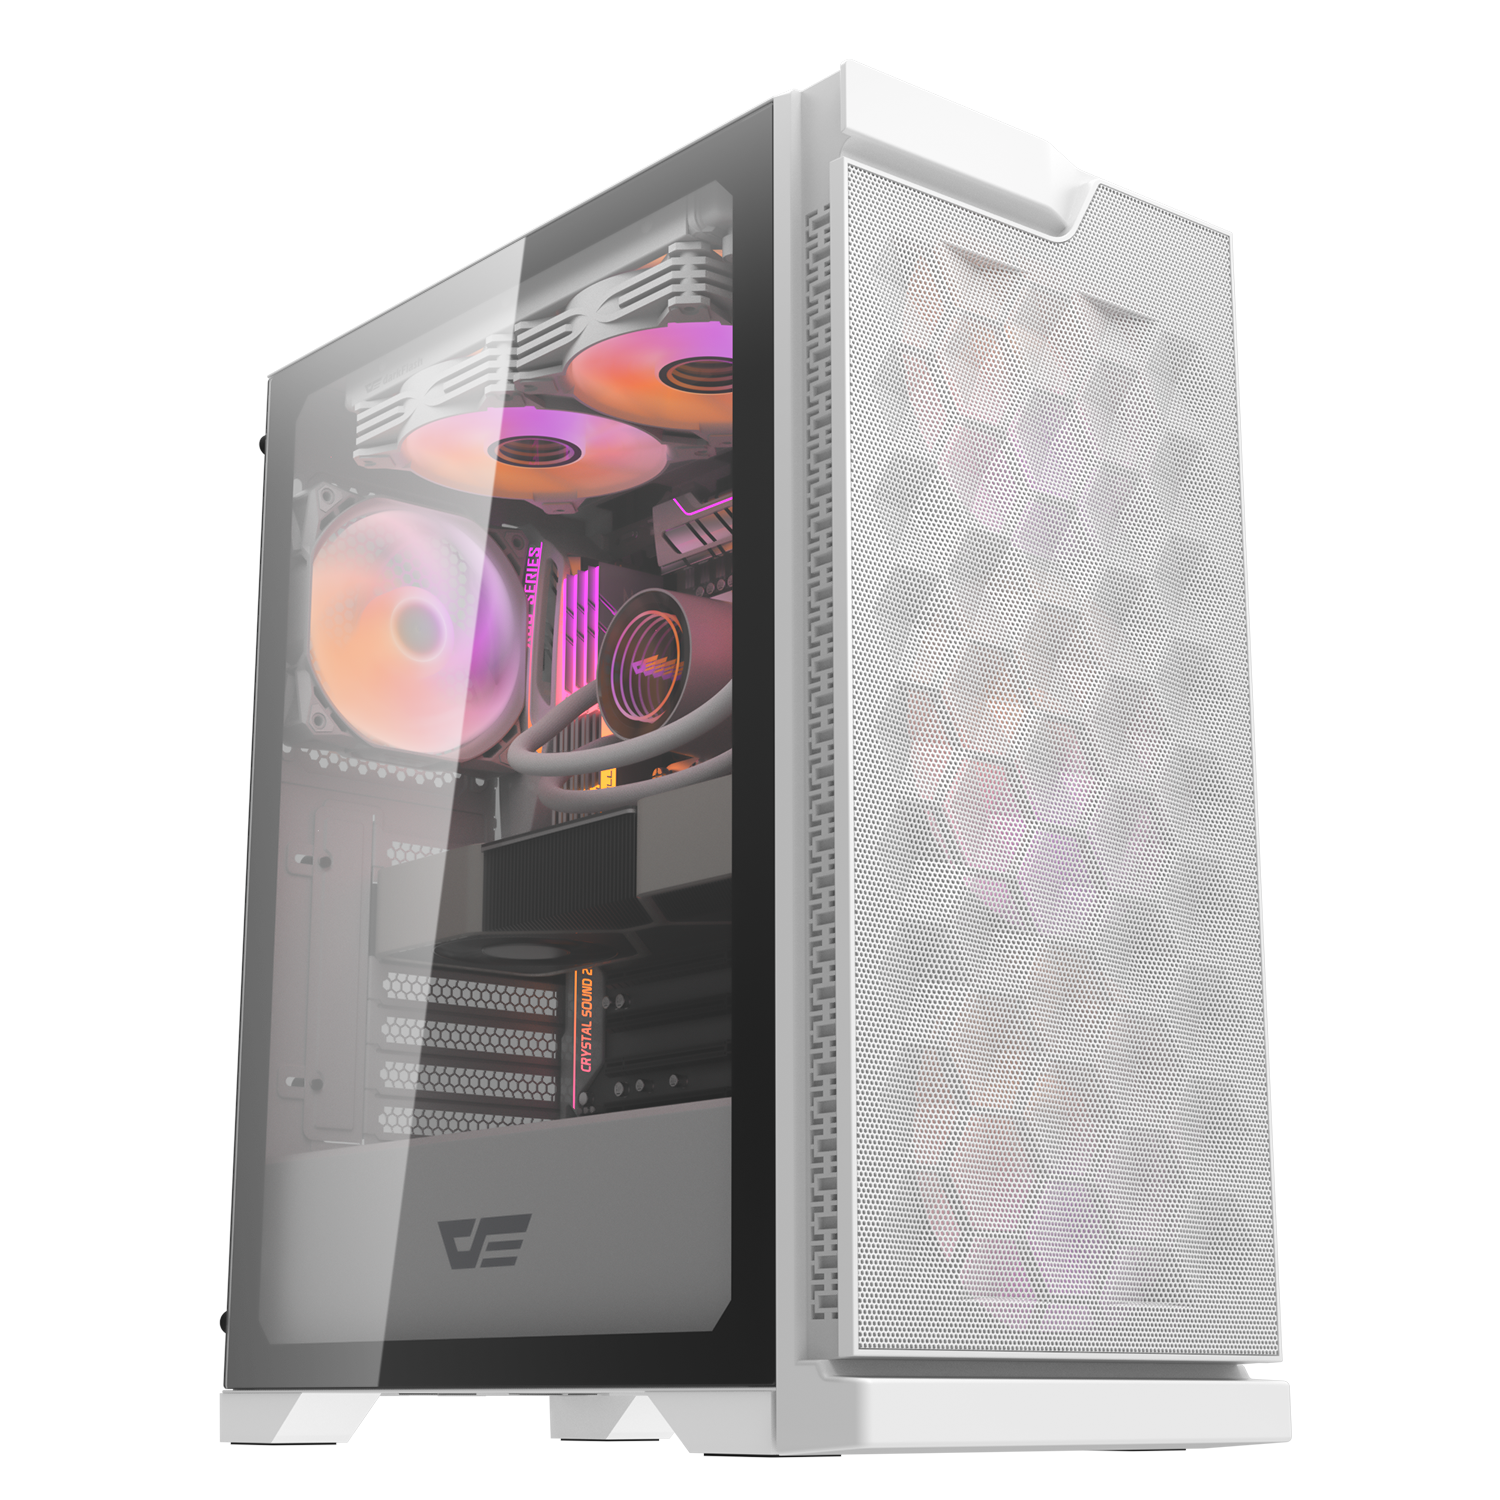 Darkflash Gaming PC Case Tempered Glass ATX Tower Computer Case with 4x ARGB Fans (DK361)